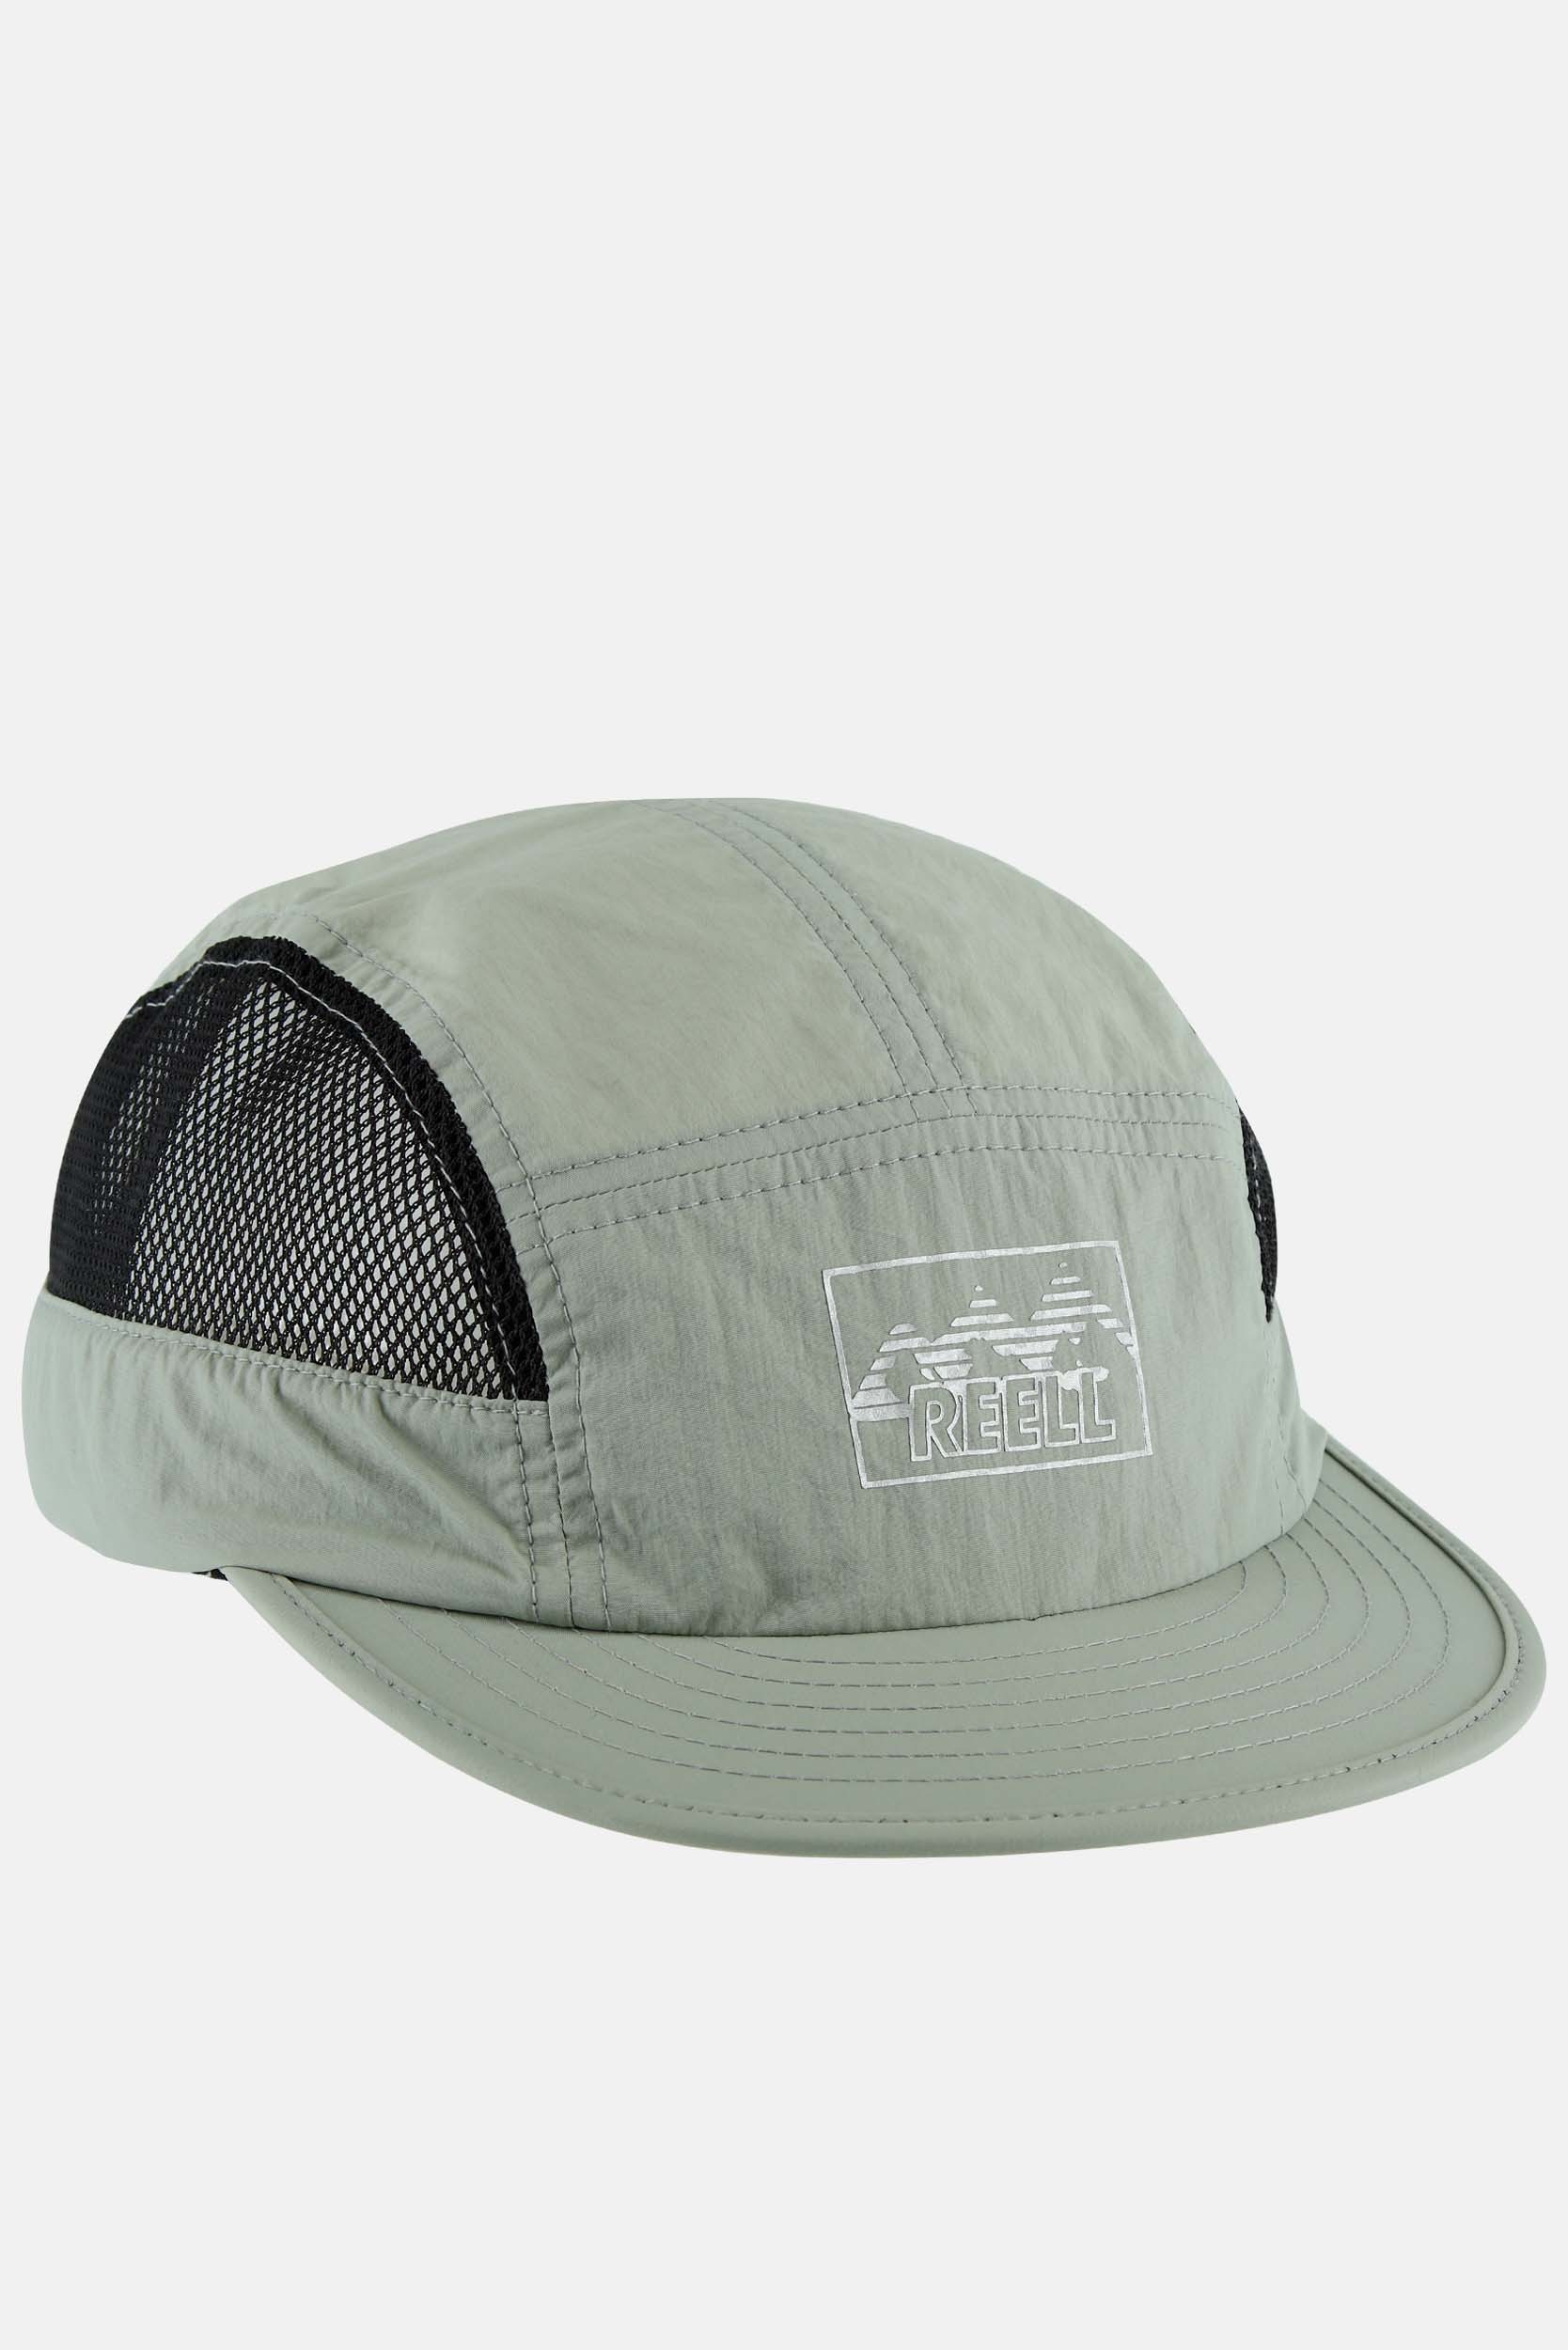 Reell Jeans PIKE CAP SEAGRASS